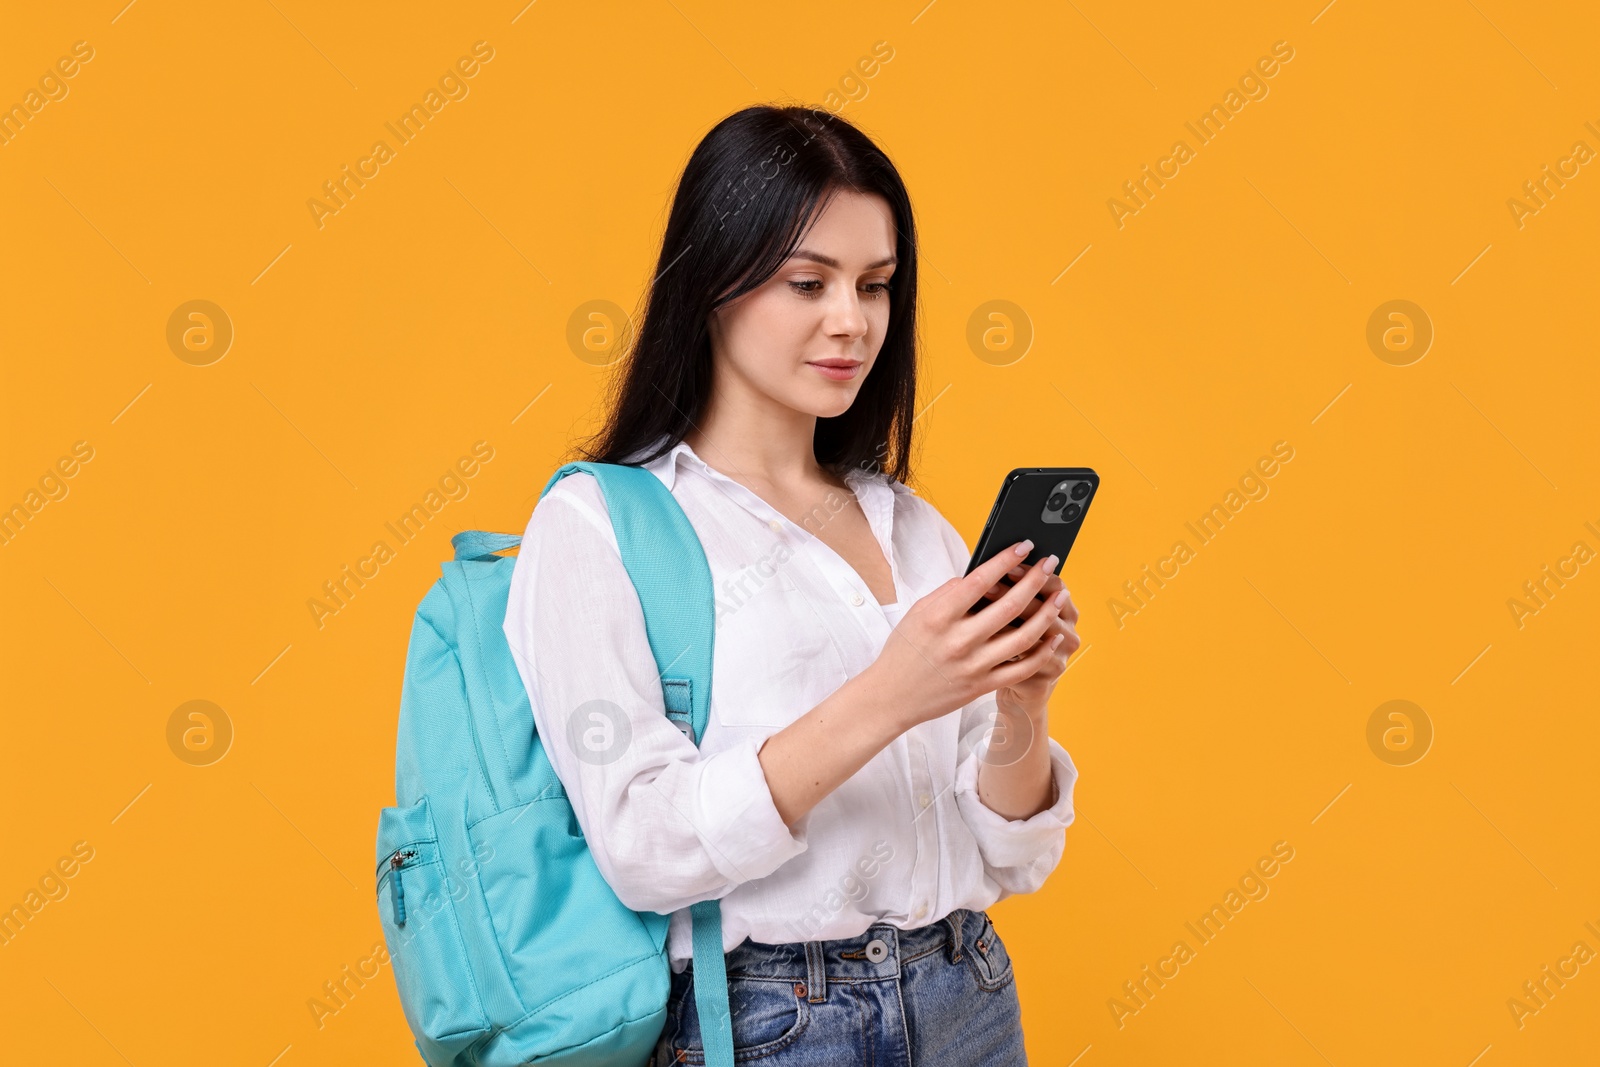 Photo of Student with smartphone and backpack on yellow background